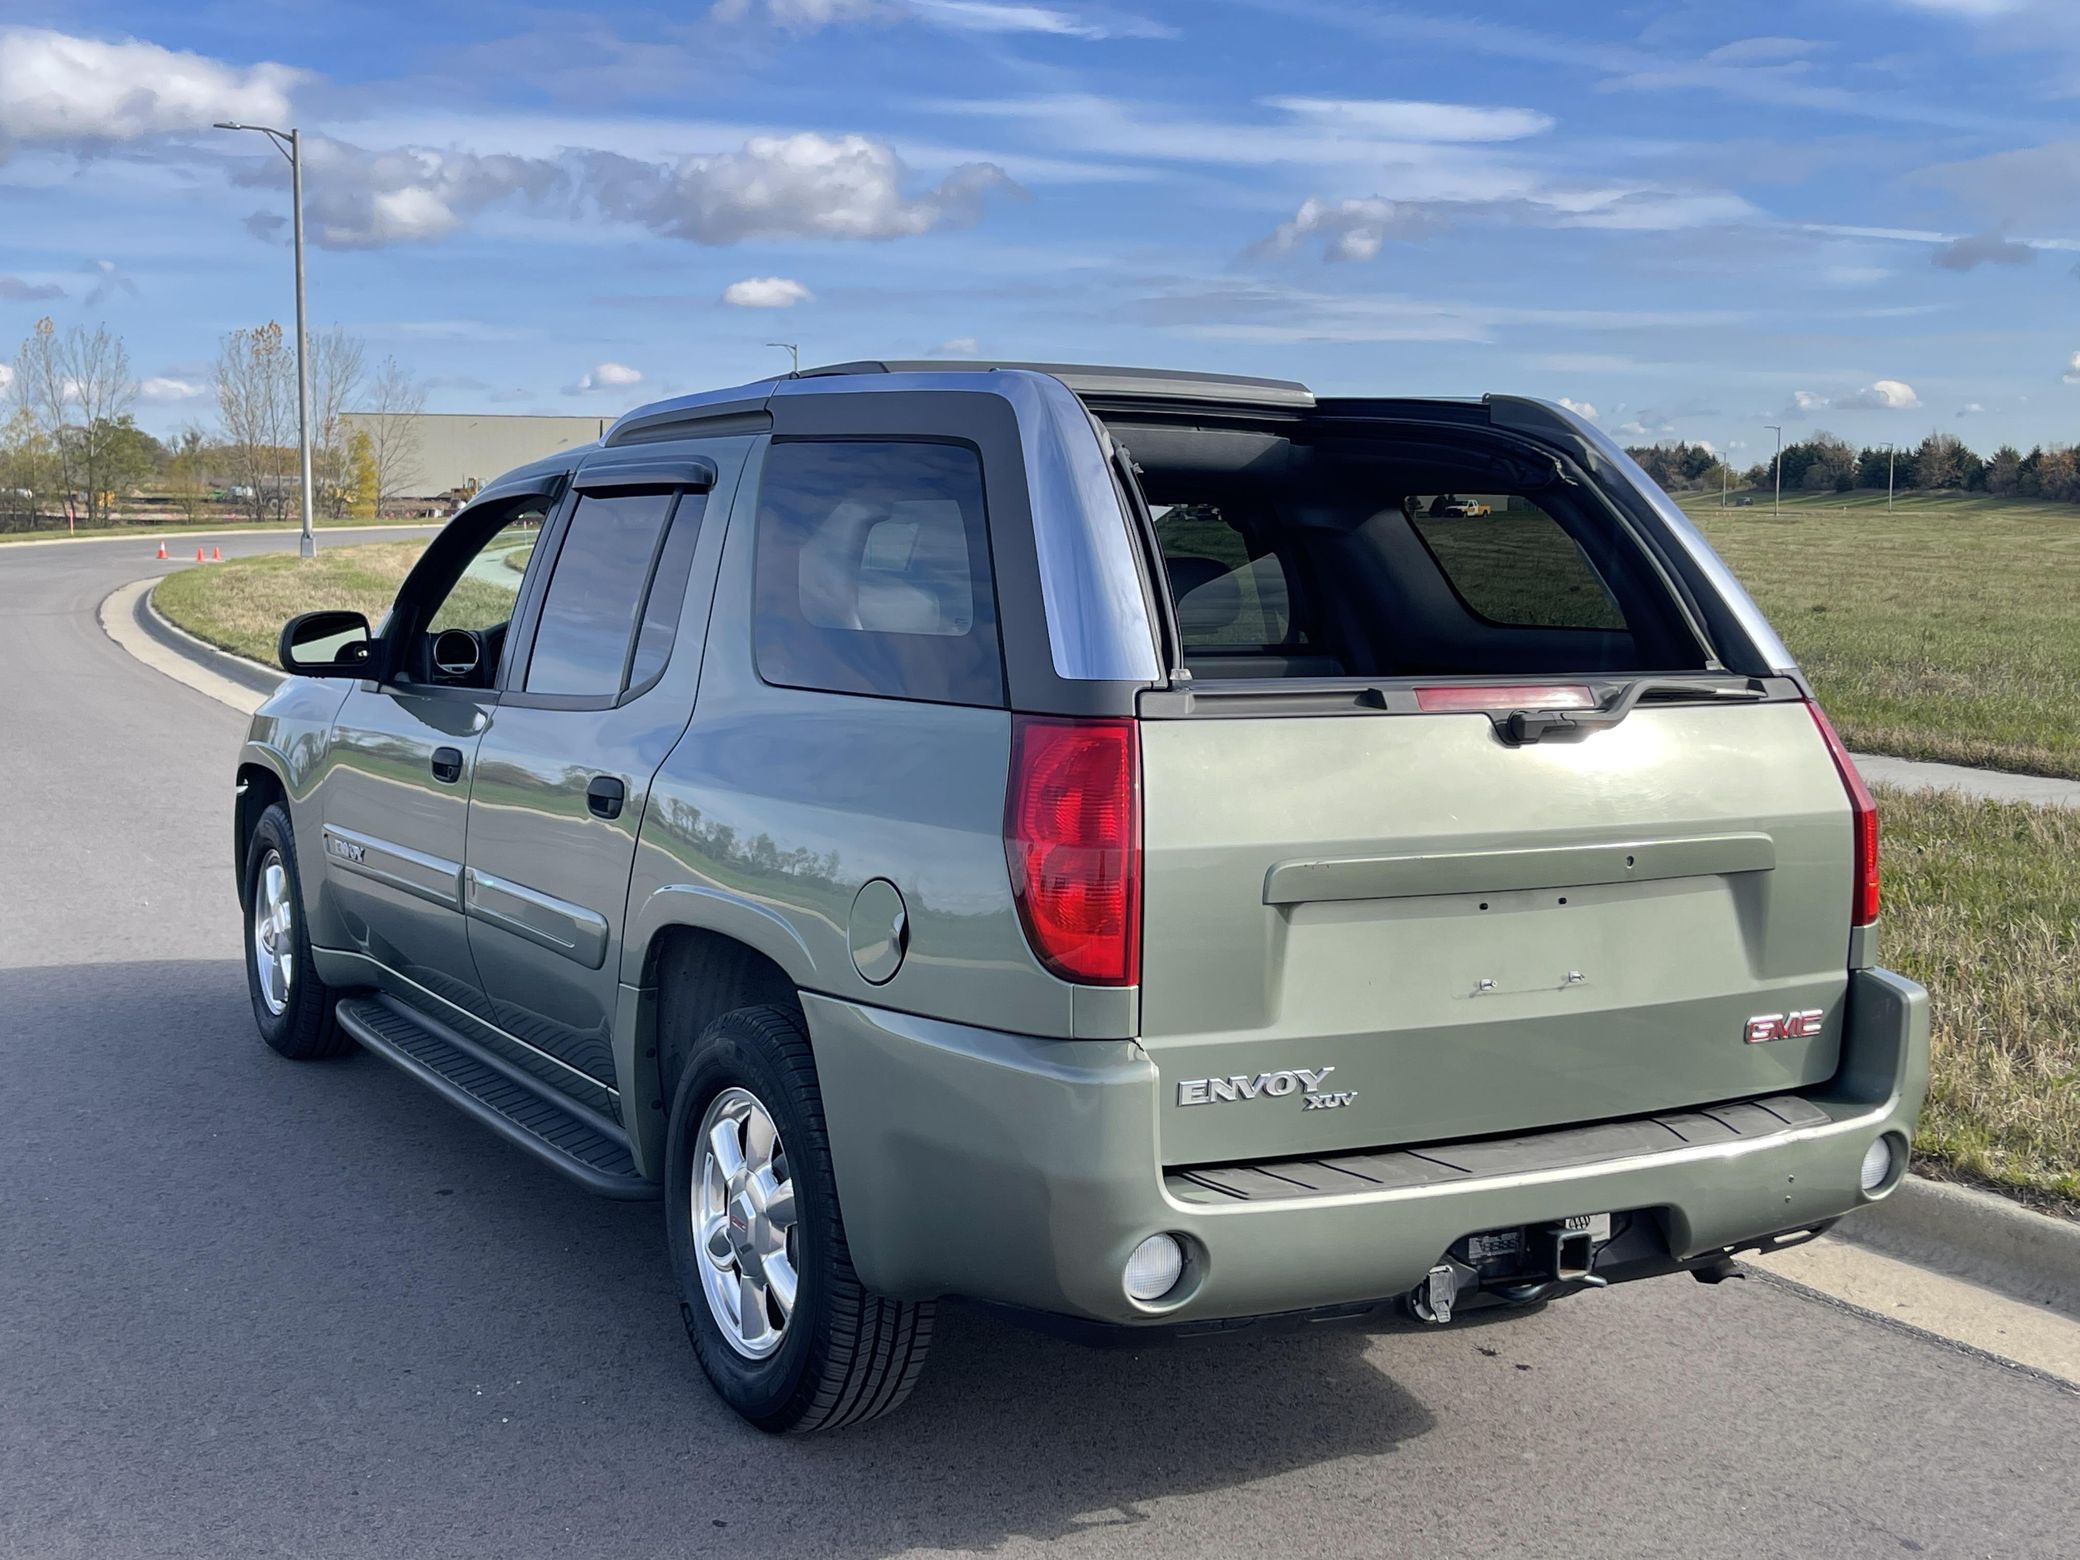 Doug DeMuro on Twitter: "It's HERE! We have a GMC Envoy XUV on @CarsAndBids  -- with 4-wheel drive, decent mileage, and NO reserve. Looking to haul a  grandfather clock? Here's your car.